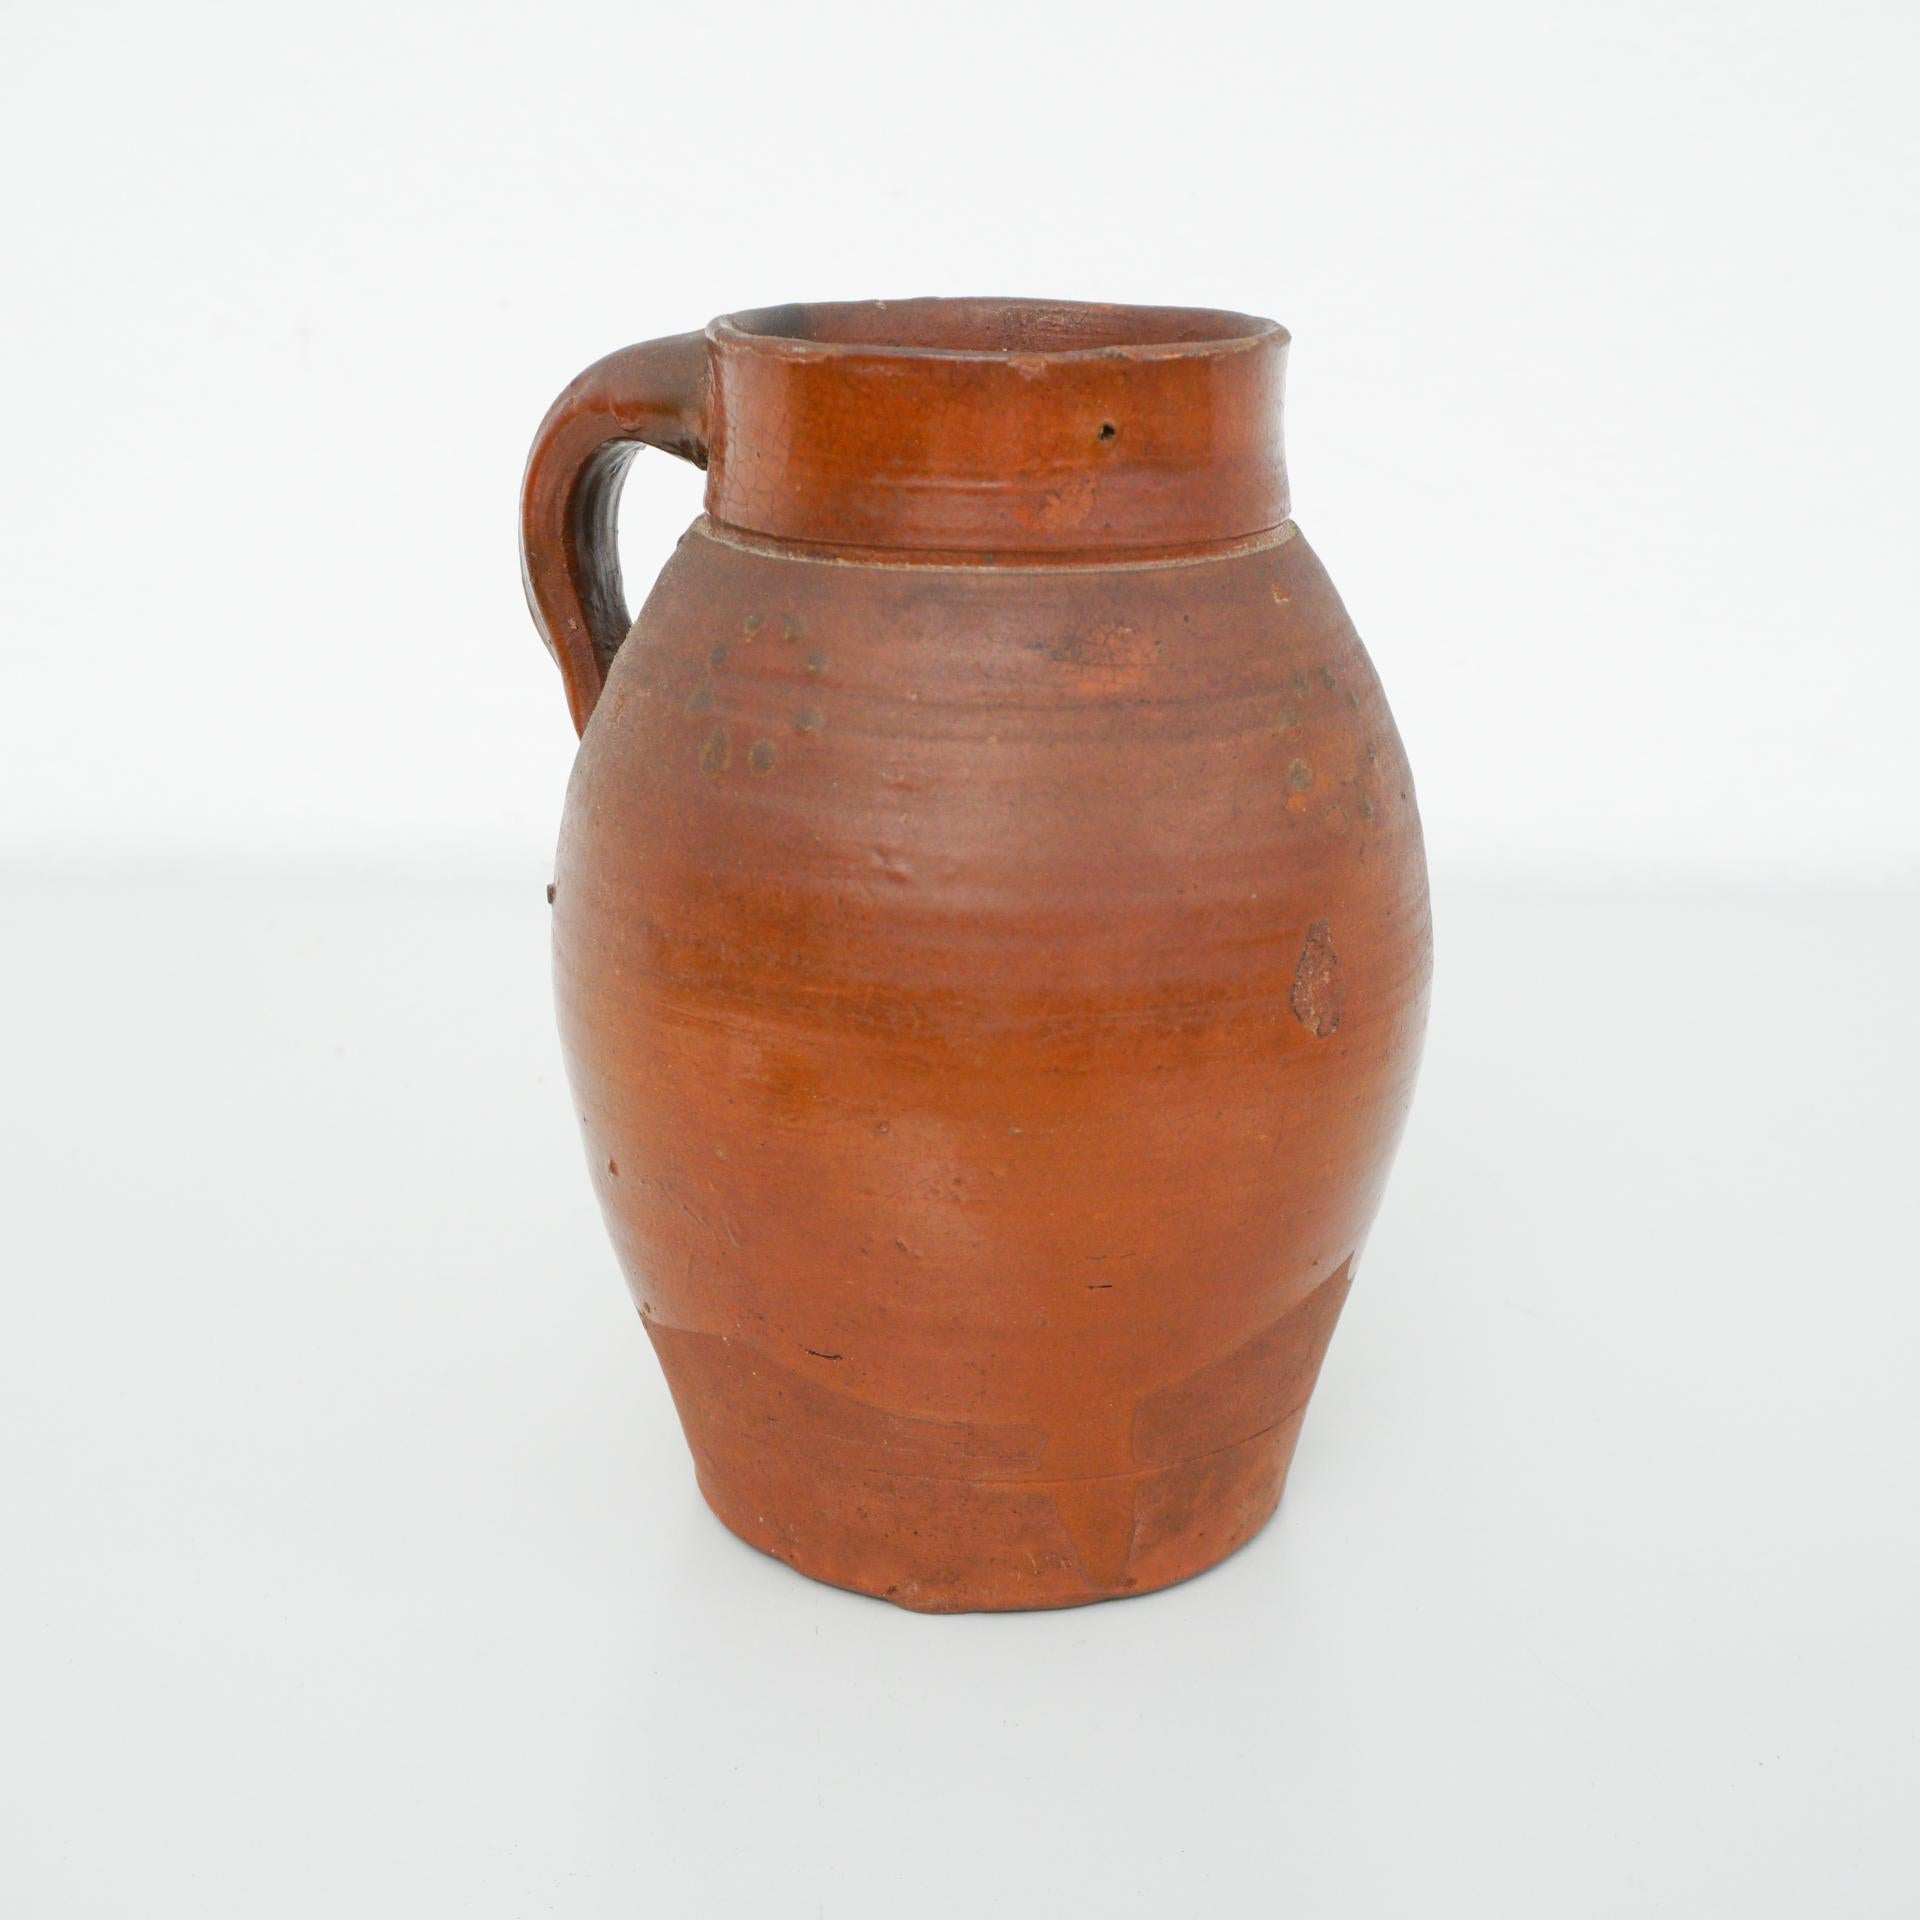 Early 20th century Traditional Spanish ceramic pitcher

In original condition with minor wear consisitent of age and use, preserving a beautiful patina.